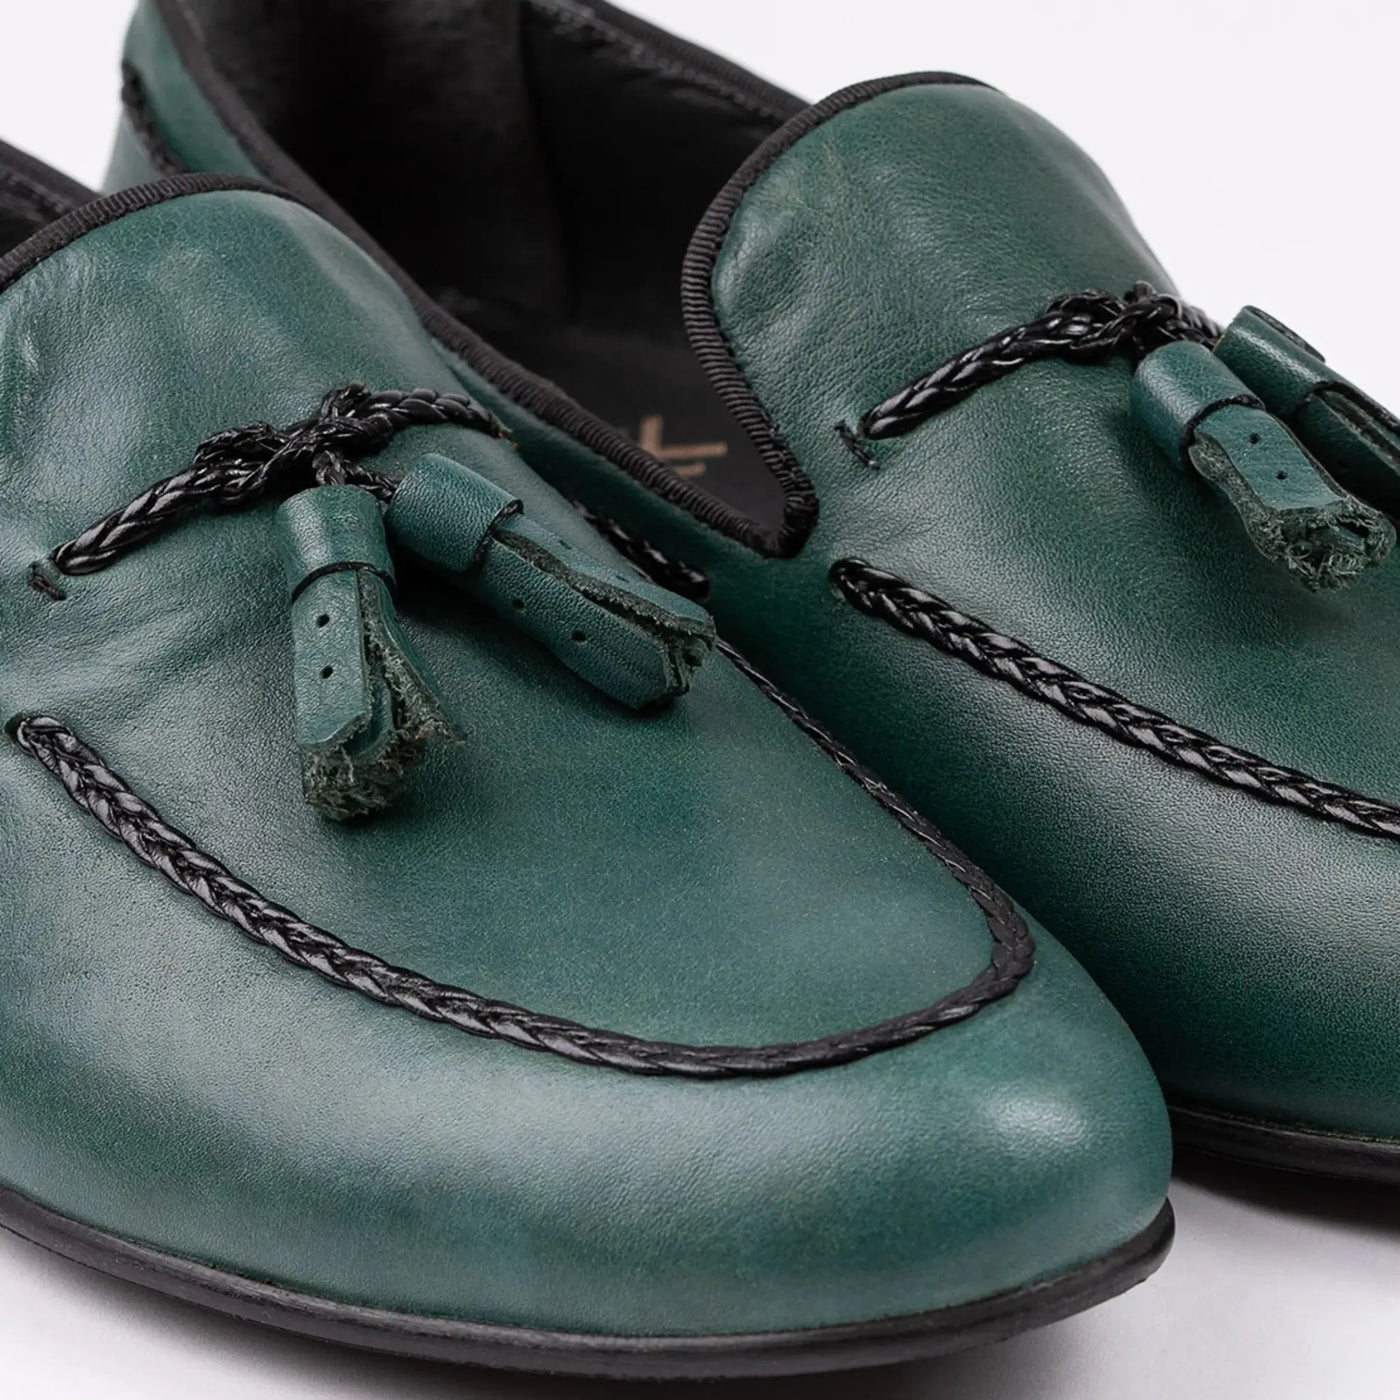 Lodevole Mens Tassel Loafers Teal Green Close Up View